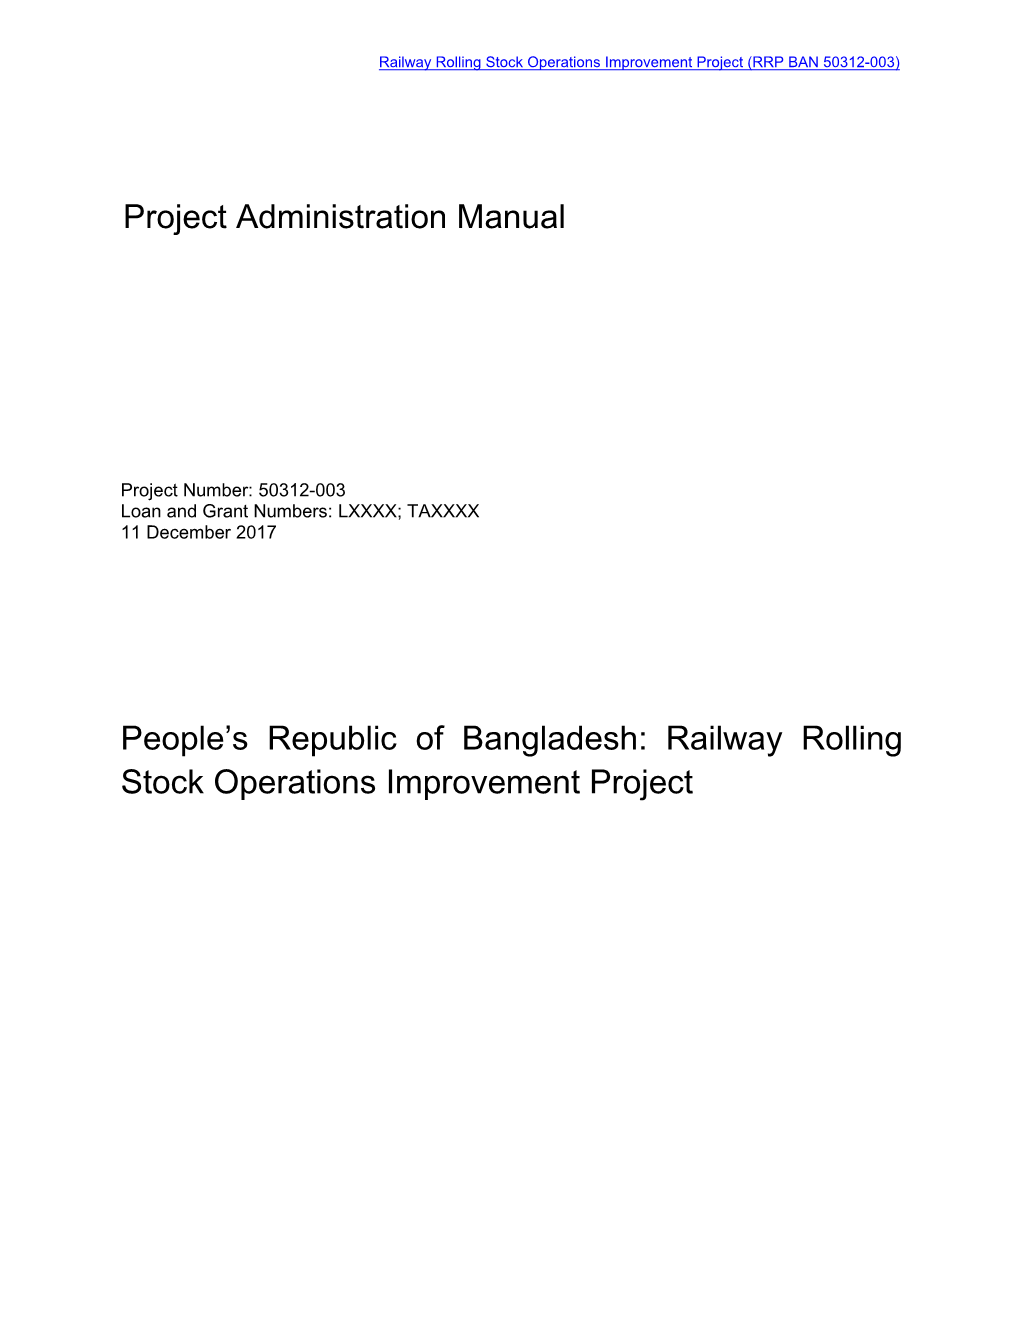 People's Republic of Bangladesh: Railway Rolling Stock Operations Improvement Project Project Administration Manual